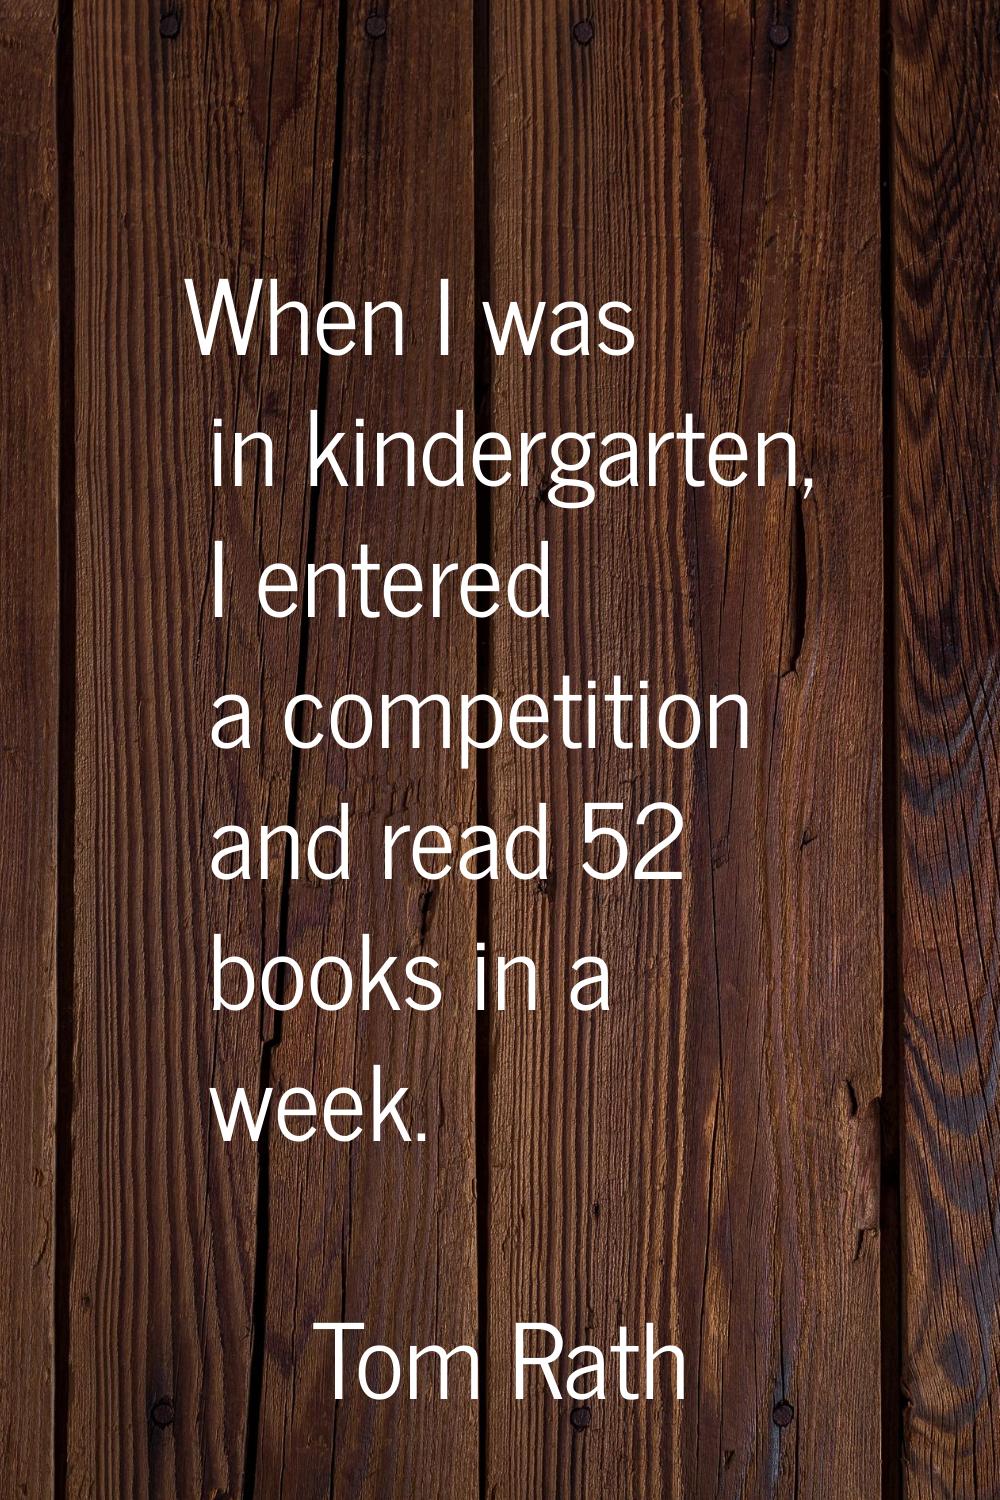 When I was in kindergarten, I entered a competition and read 52 books in a week.